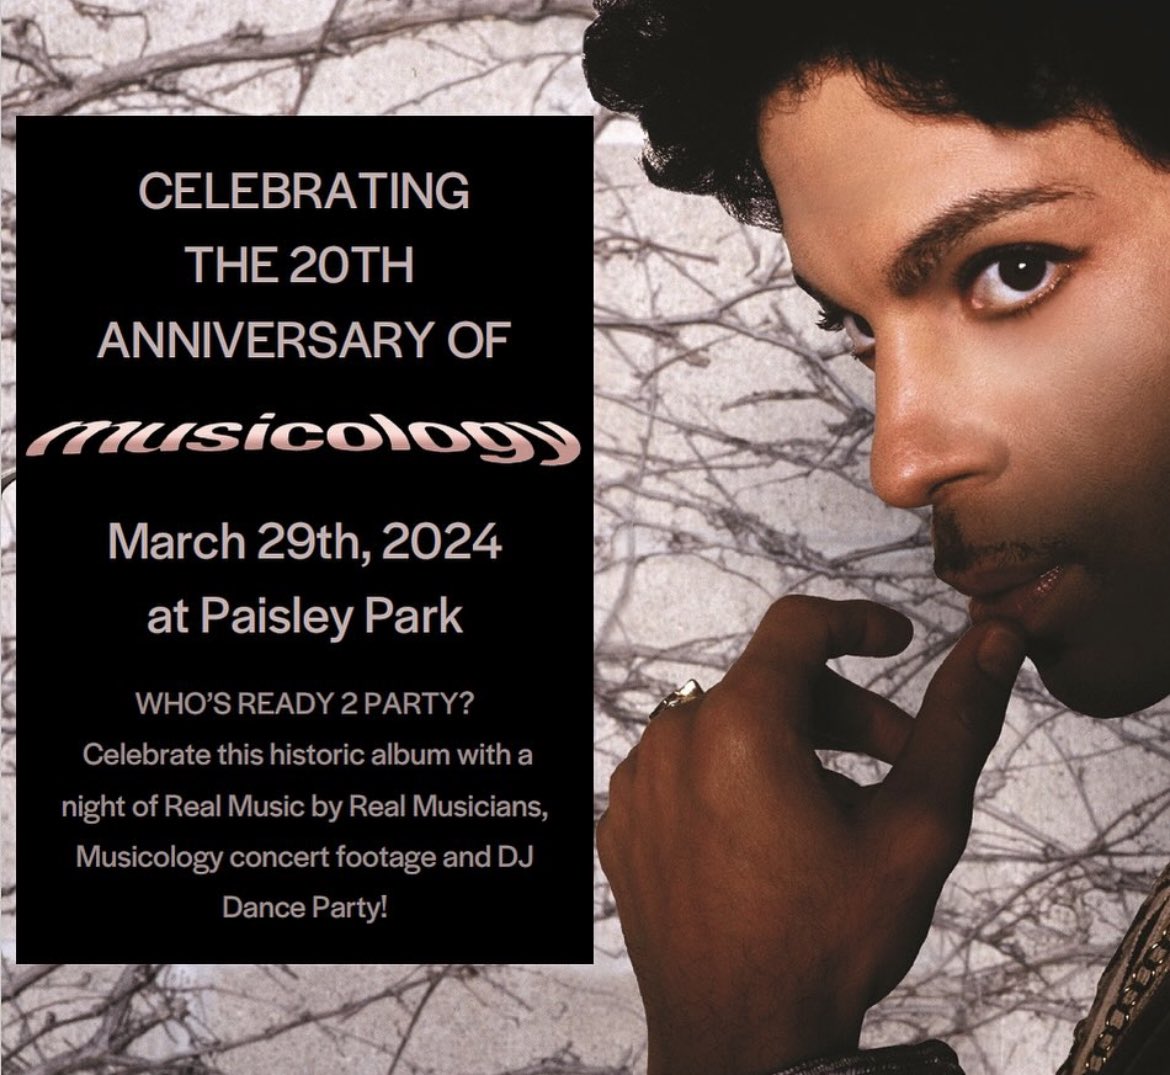 Did you miss these events this year at Paisley Park? For those who joined us, please leave a comment and share your experience. Thank you 💜 #PaisleyPark #Prince